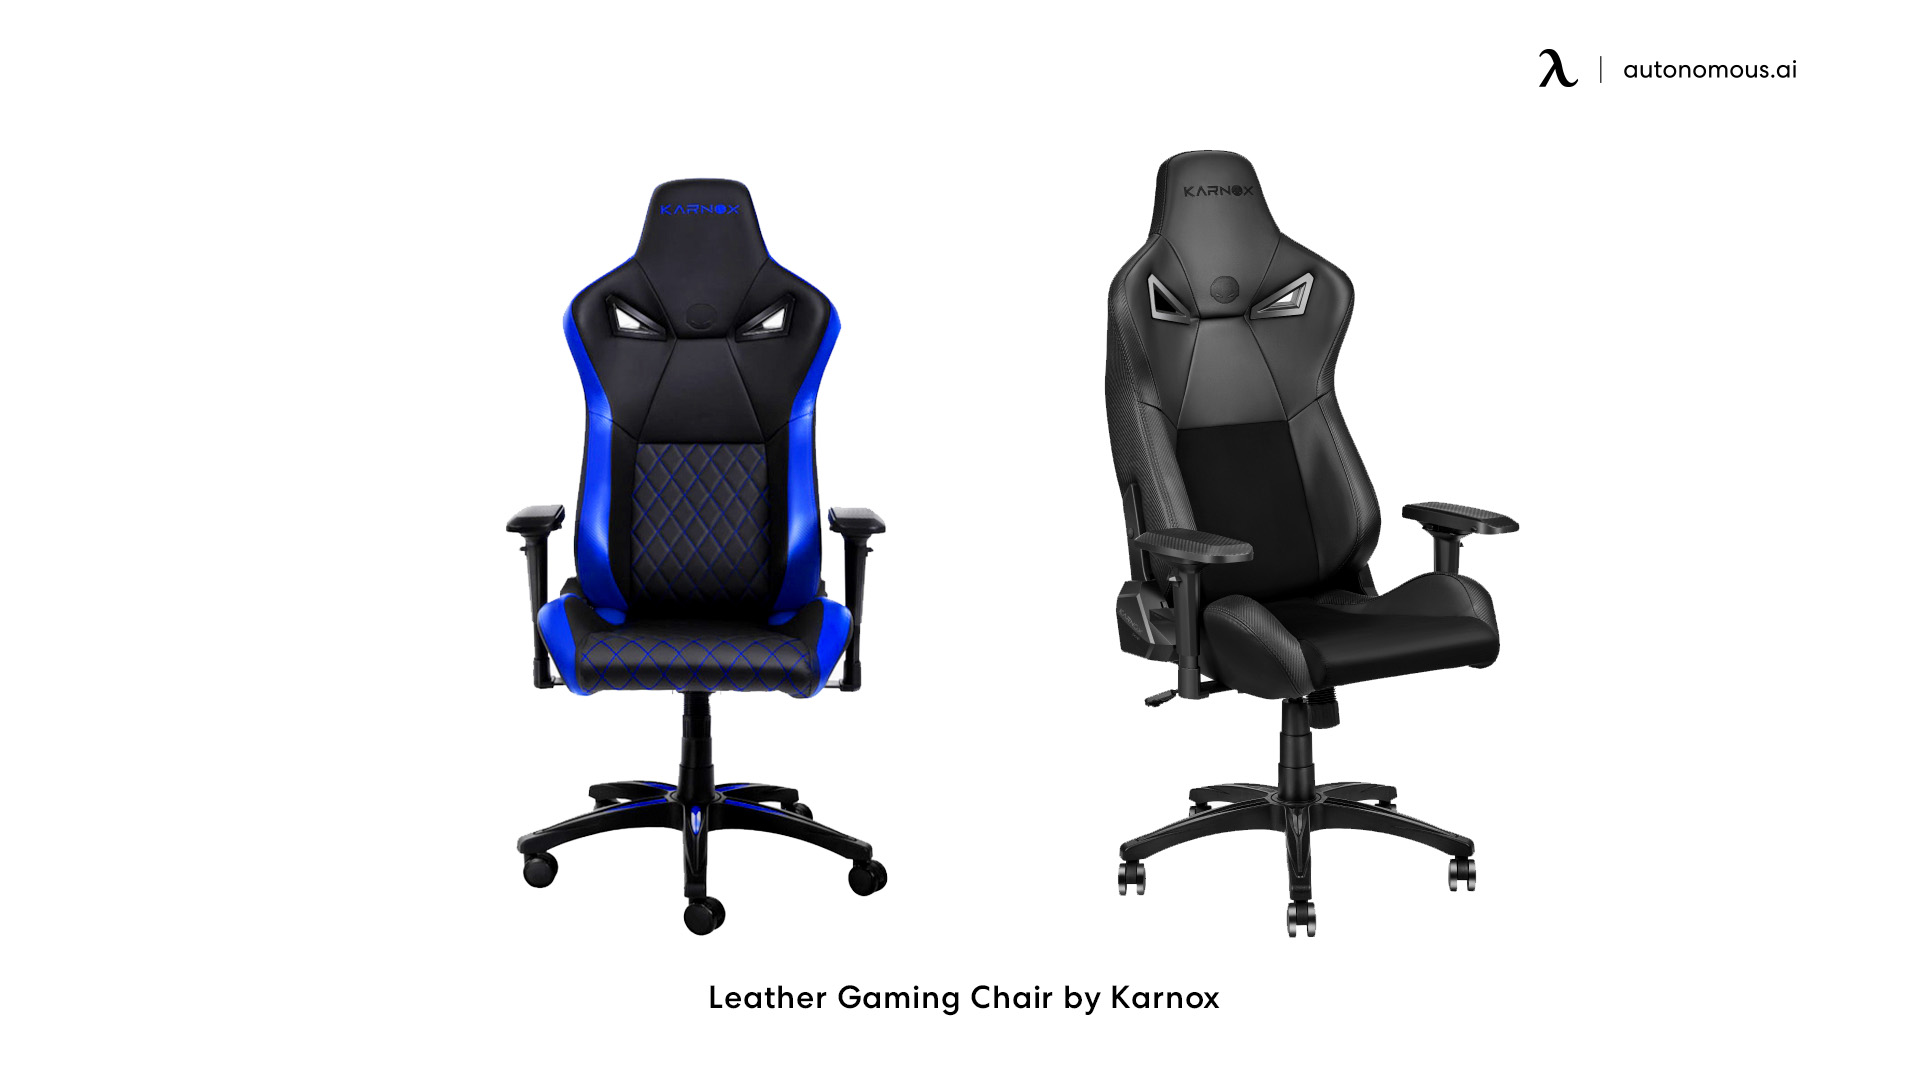 Leather Gaming Chair by Karnox best gaming chair under $300